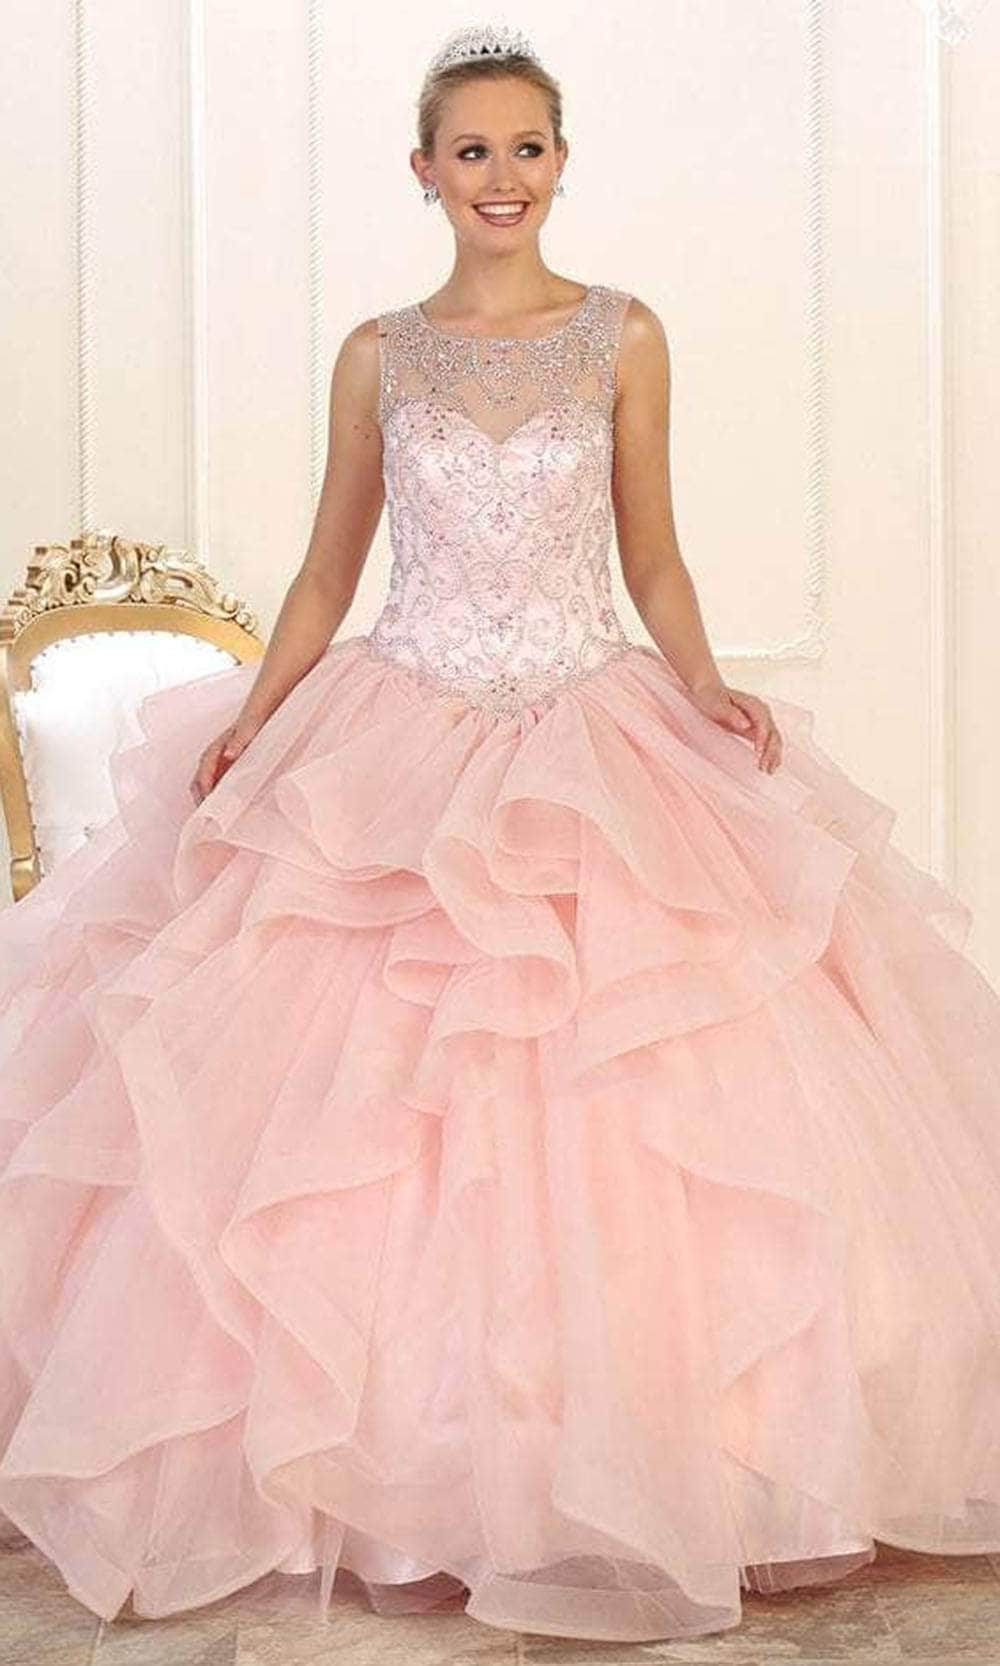 Image of May Queen LK105 - Beaded Illusion Scoop Prom Ballgown